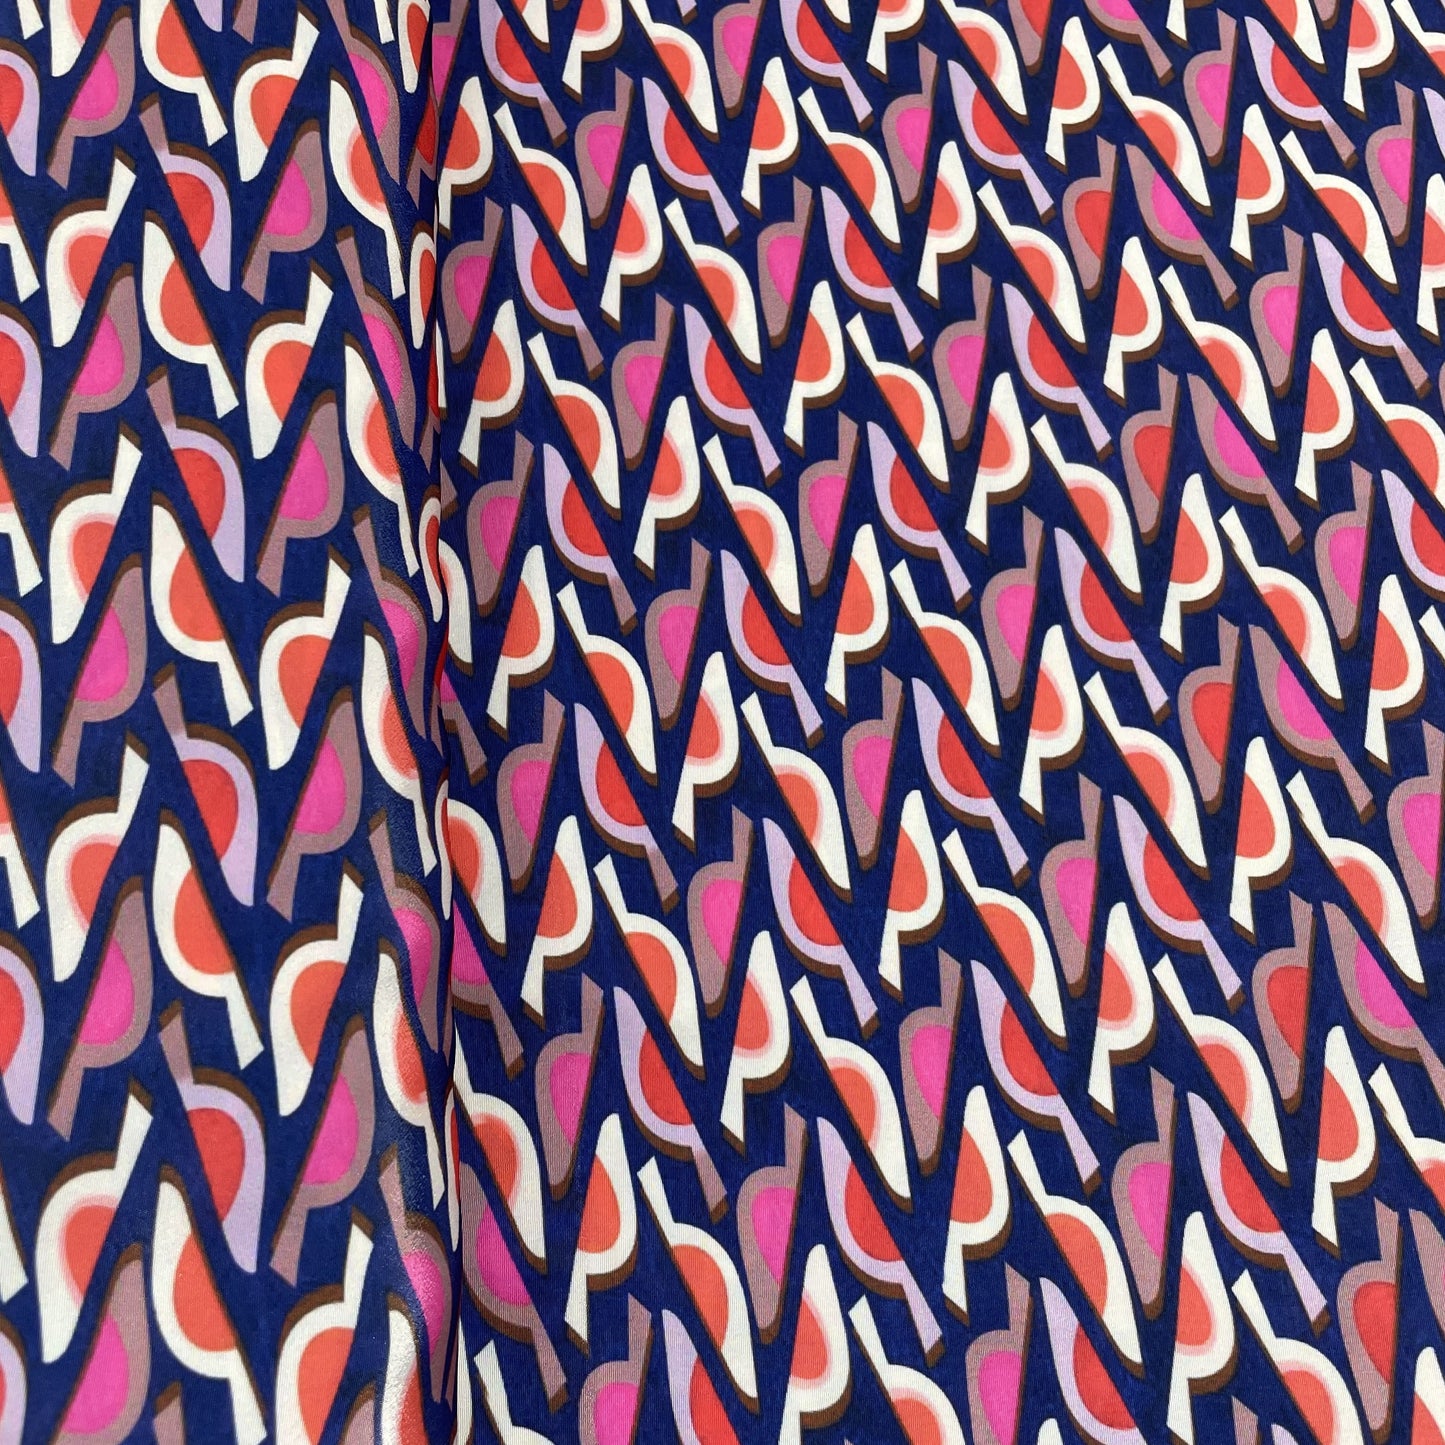 Premium Blue Red Ikkat Print French Crepe Fabric